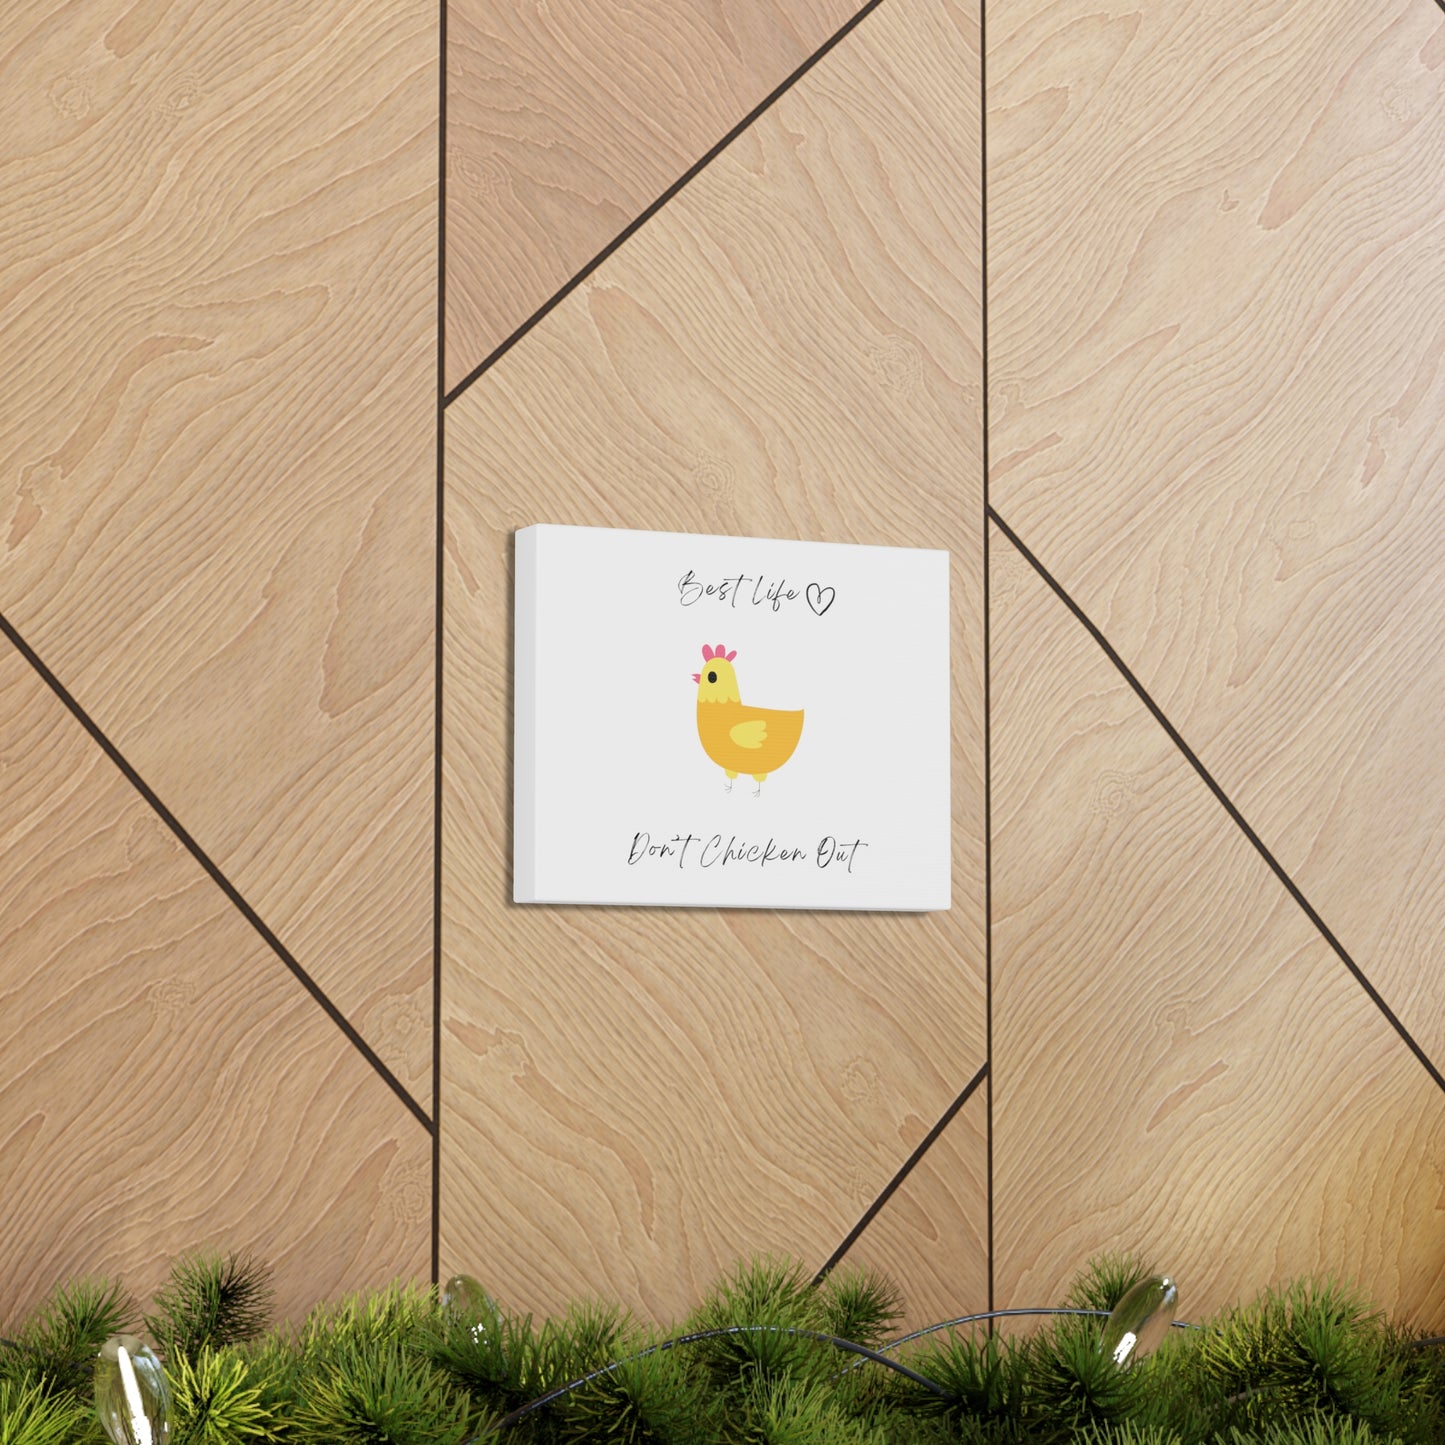 Don't Chicken Out - Art - Canvas Gallery Wraps